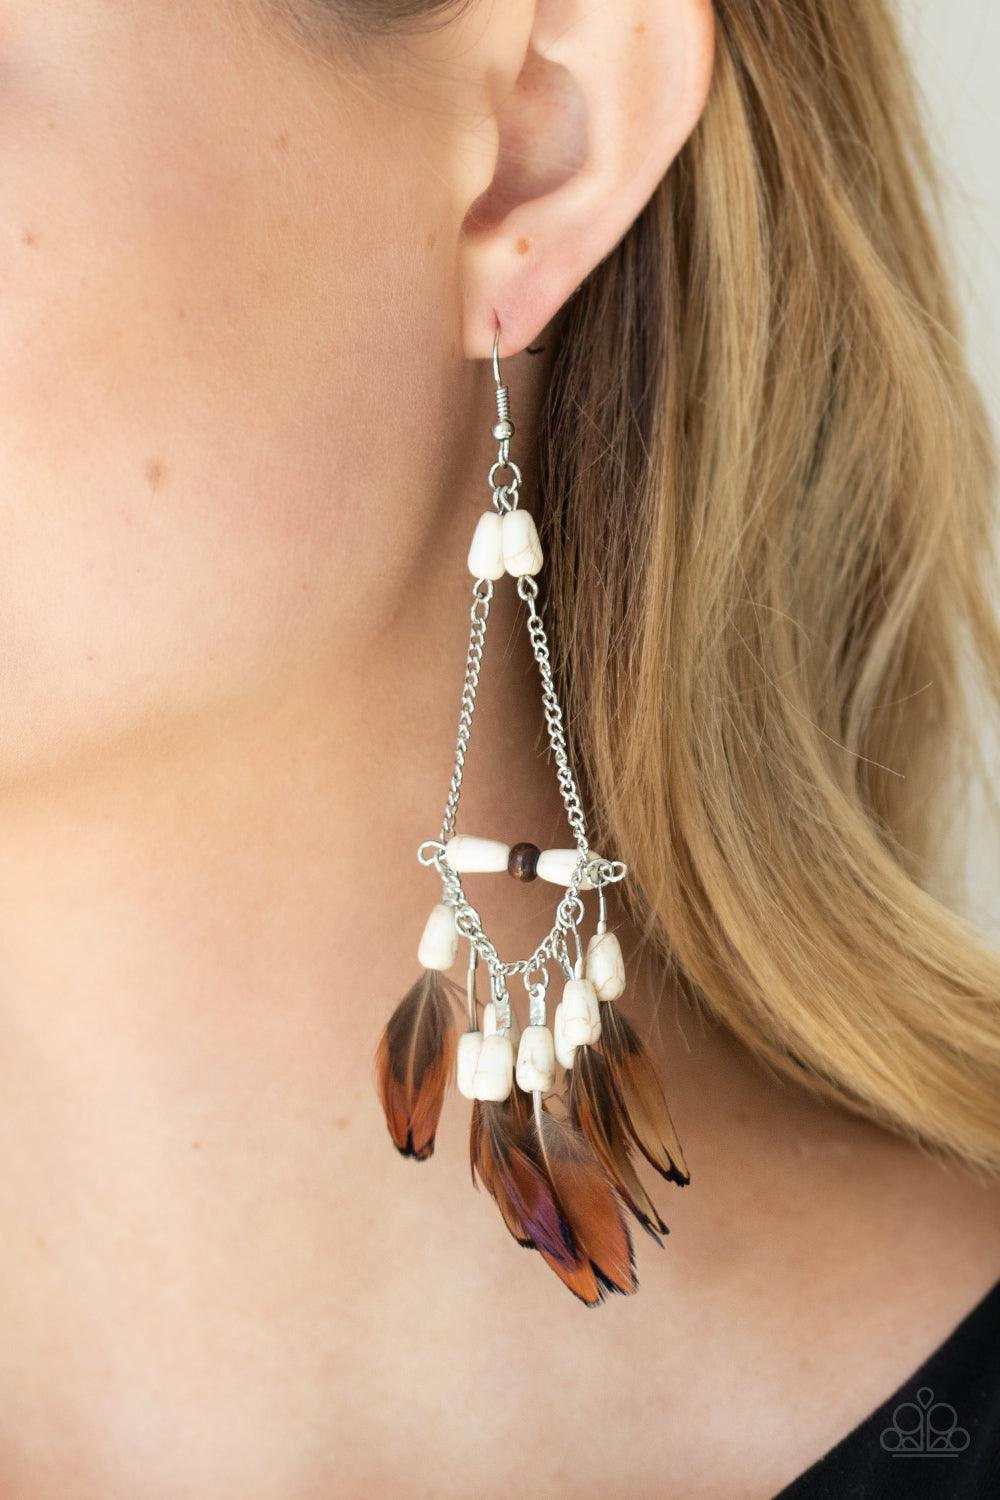 Paparazzi Accessories Haute Hawk - White Infused with a wooden accent, an earthy assortment of white stone teardrop beads and dainty brown feathers create a free-spirited fringe at the bottom of a shimmery silver chain teardrop for a wildly wonderful fini